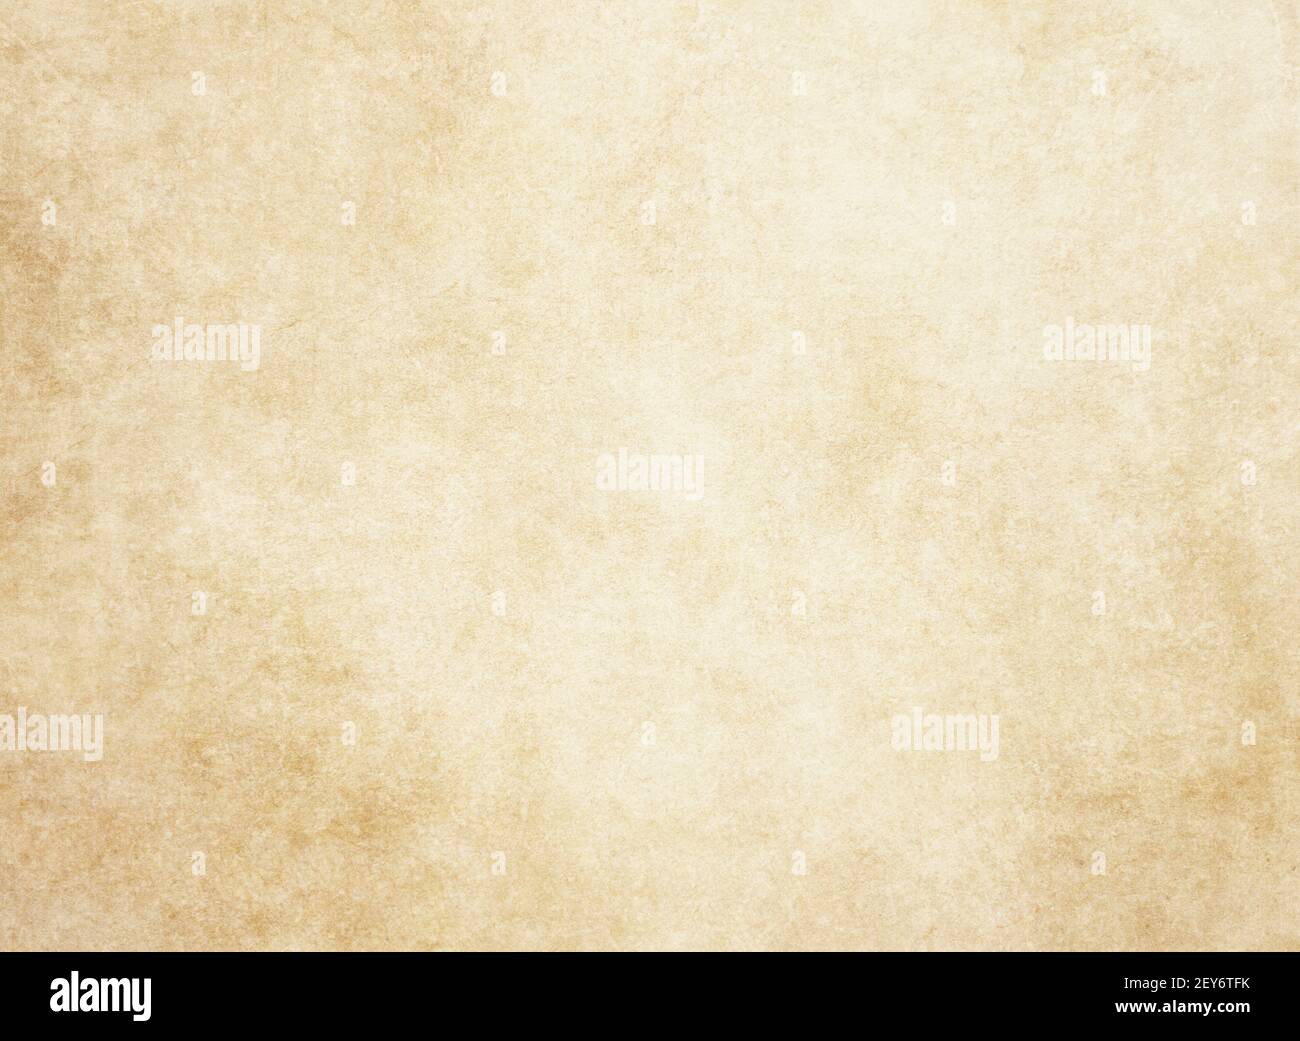 Bad condition paper texture for background. Stock Photo